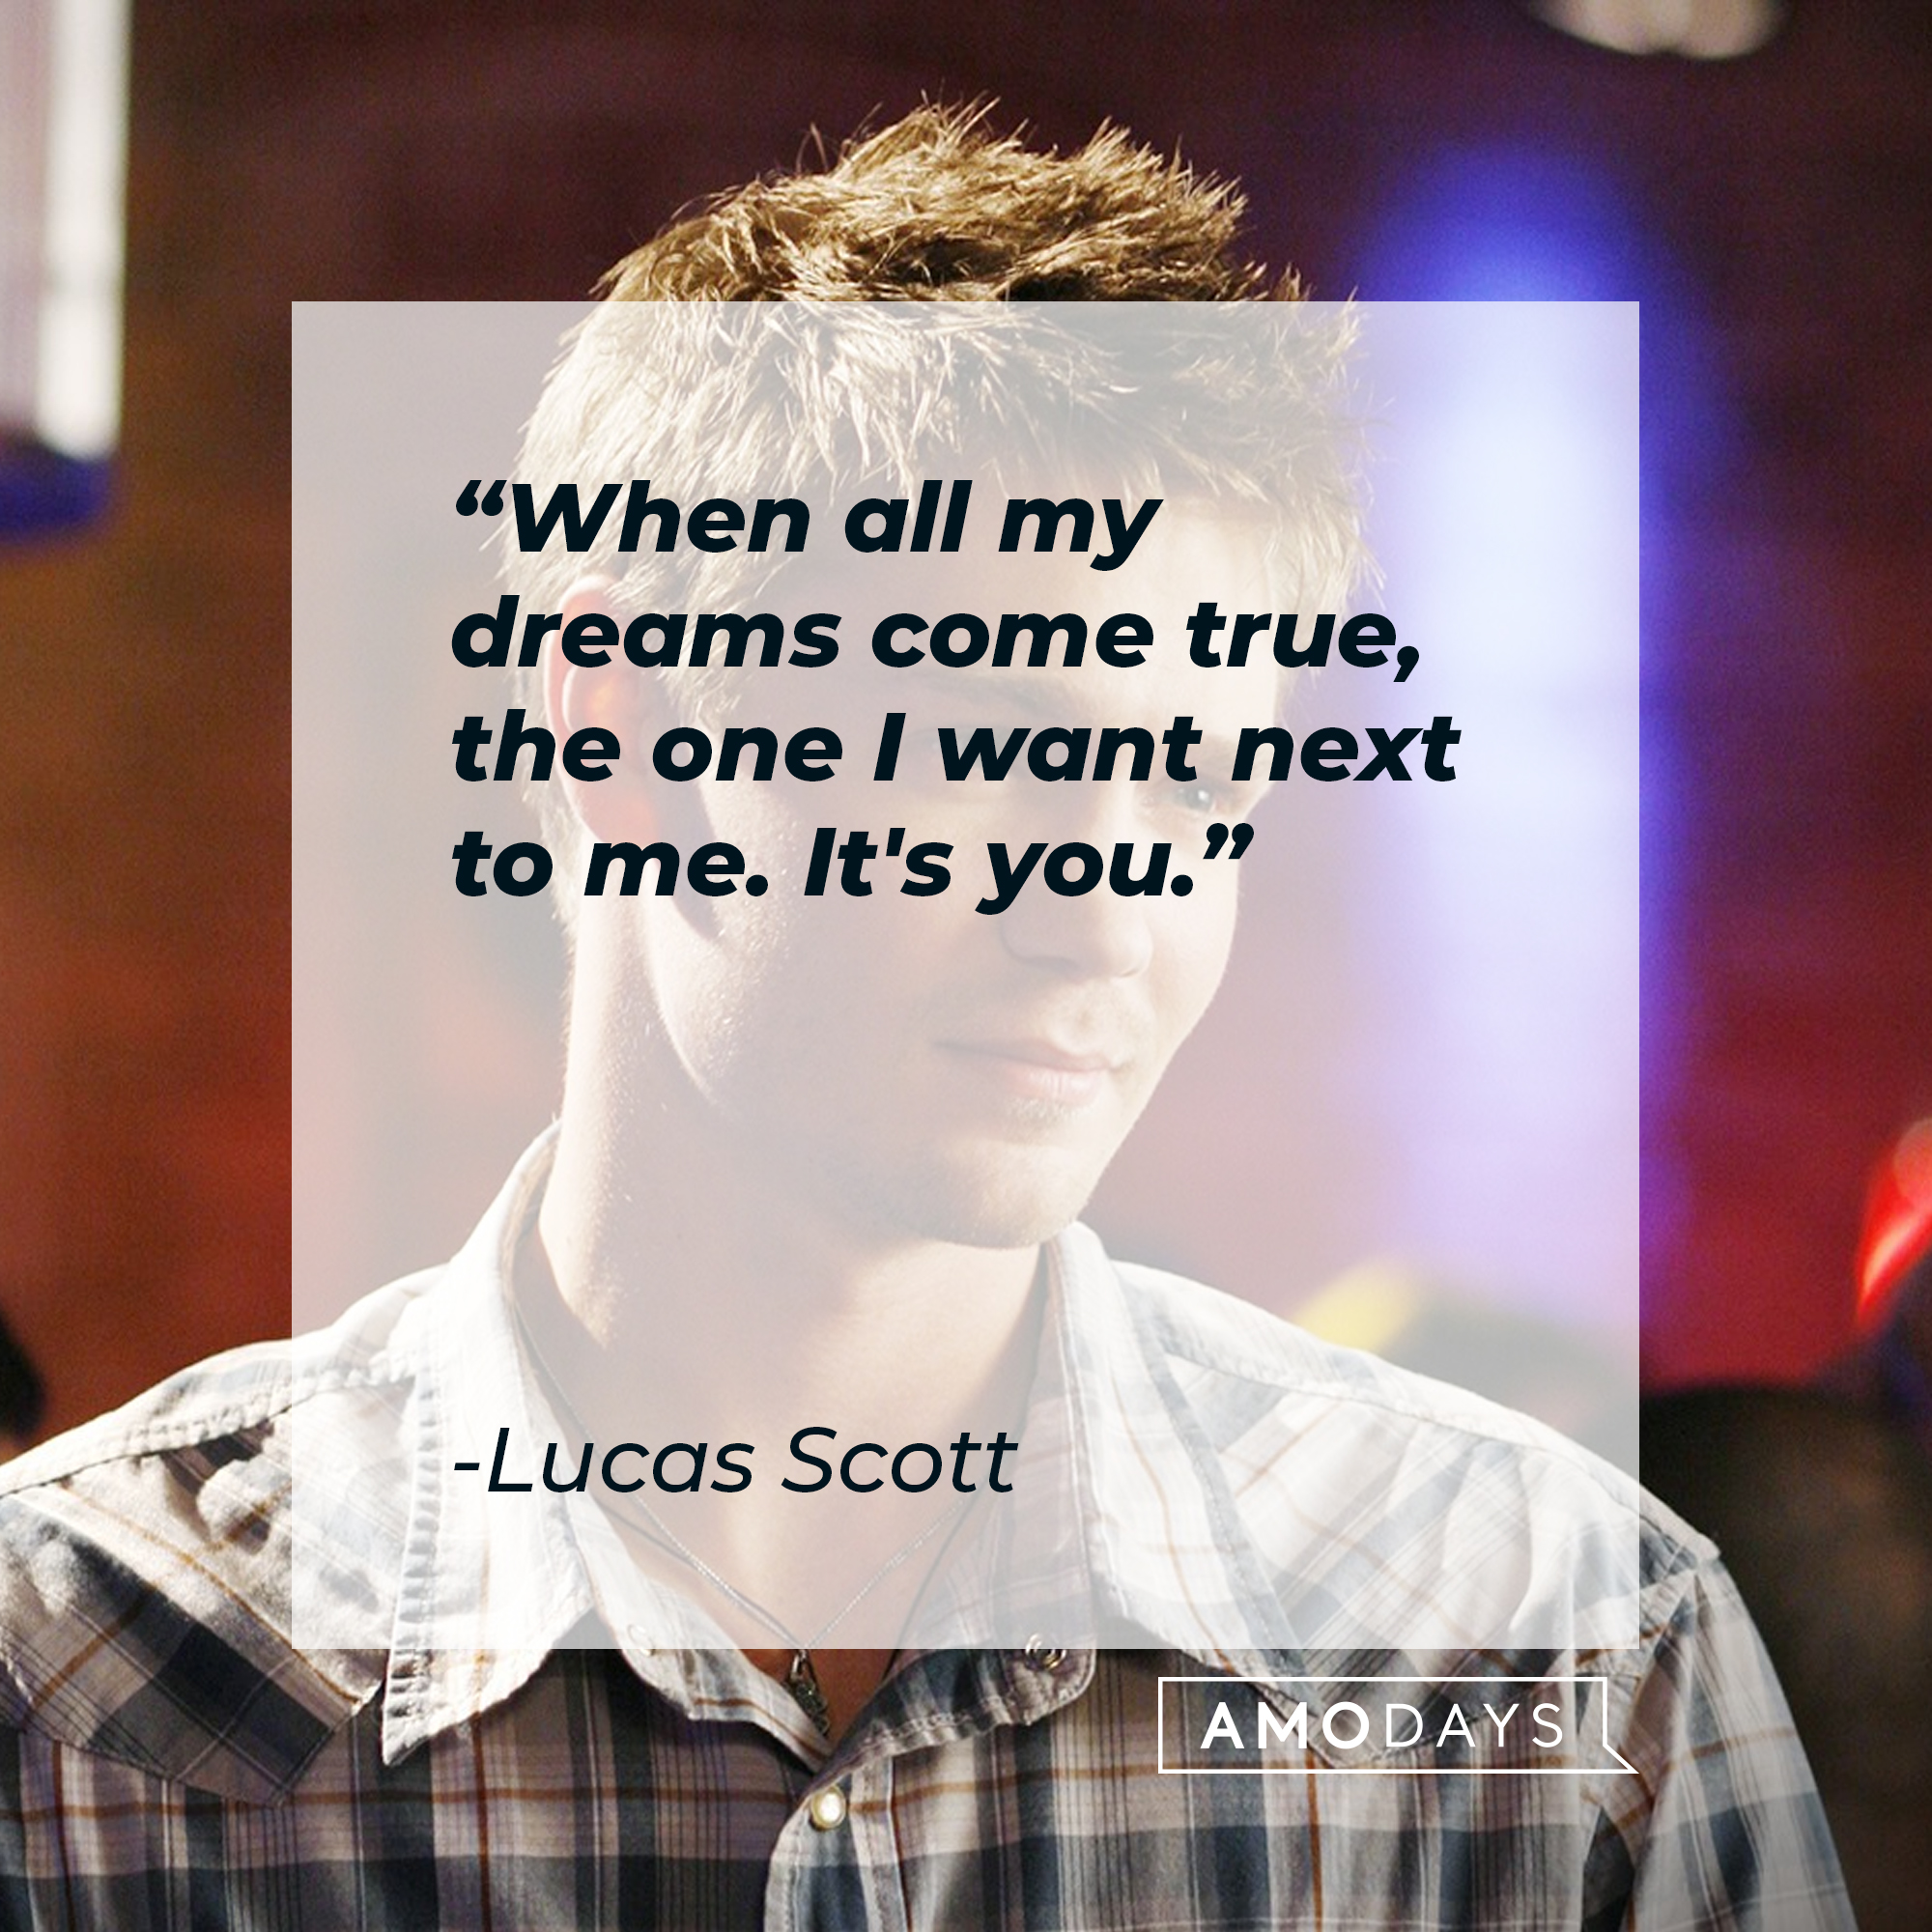 Lucas Scott with his quote, "When all my dreams come true, the one I want next to me. It's you." | Source: Facebook/OneTreeHill